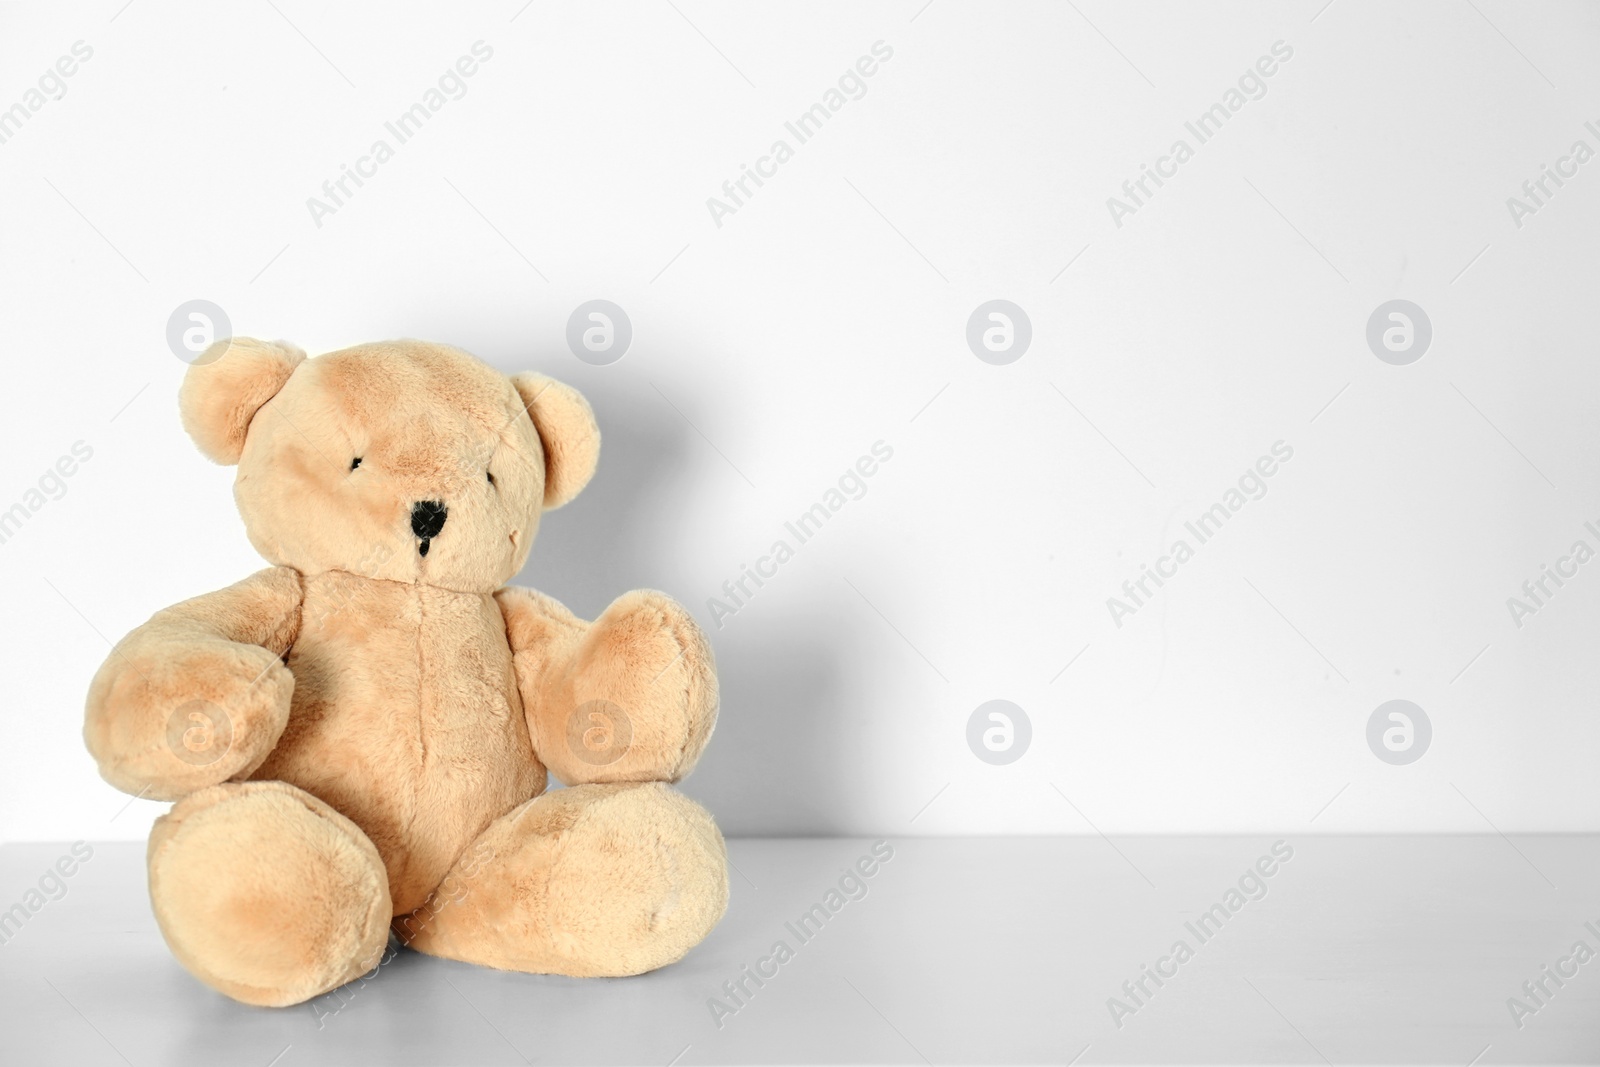 Photo of Teddy bear for baby room interior on table near white wall